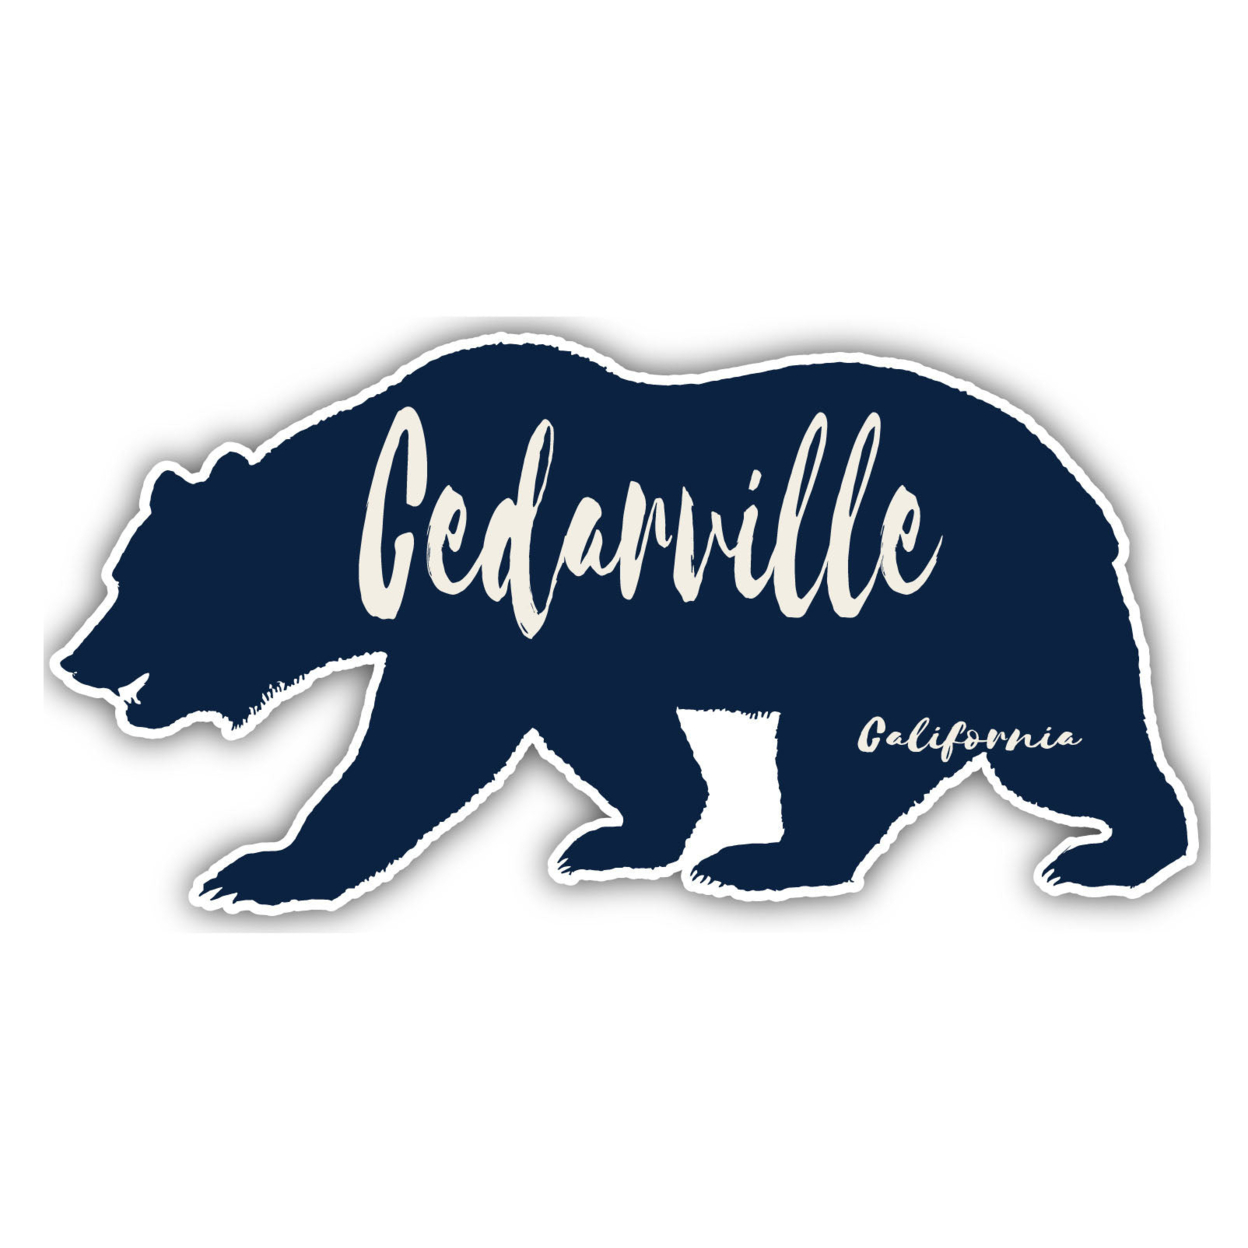 Cedarville California Souvenir Decorative Stickers (Choose Theme And Size) - 4-Pack, 12-Inch, Bear